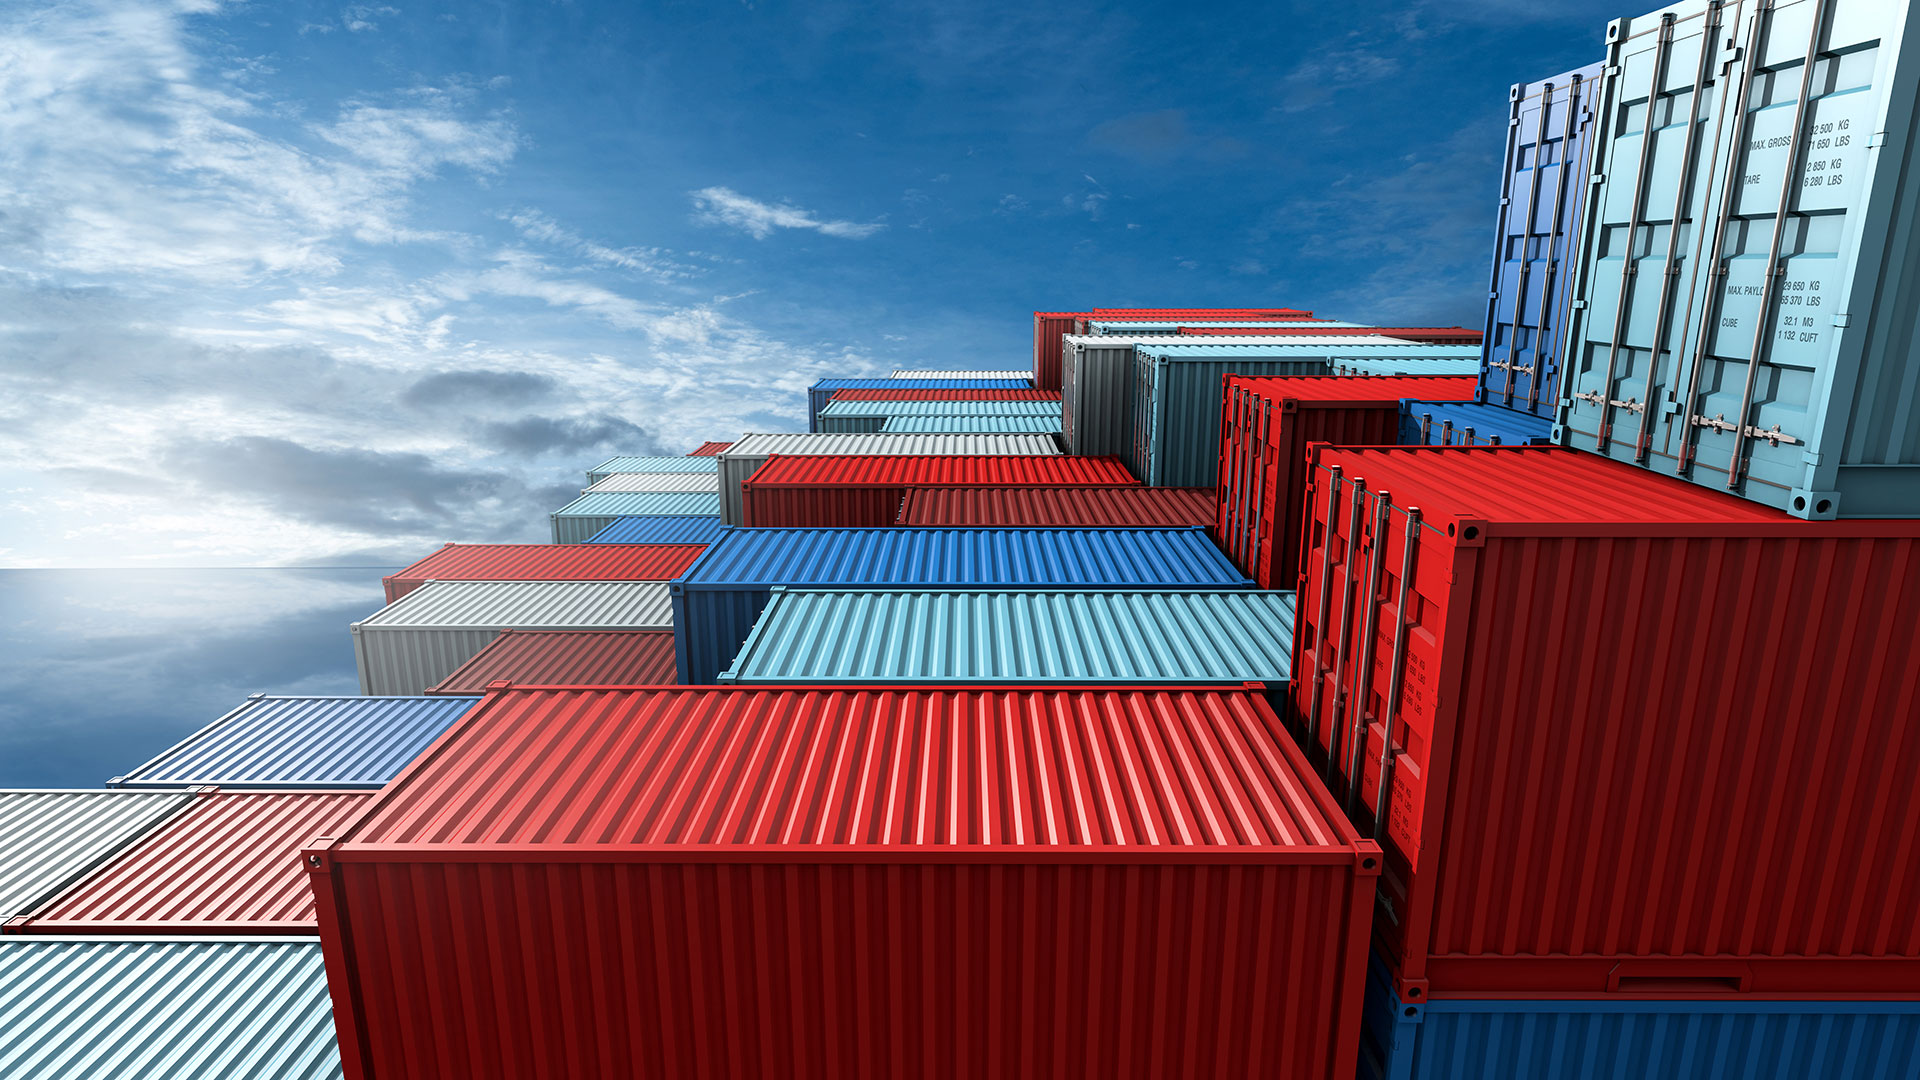 Colourful shipping containers